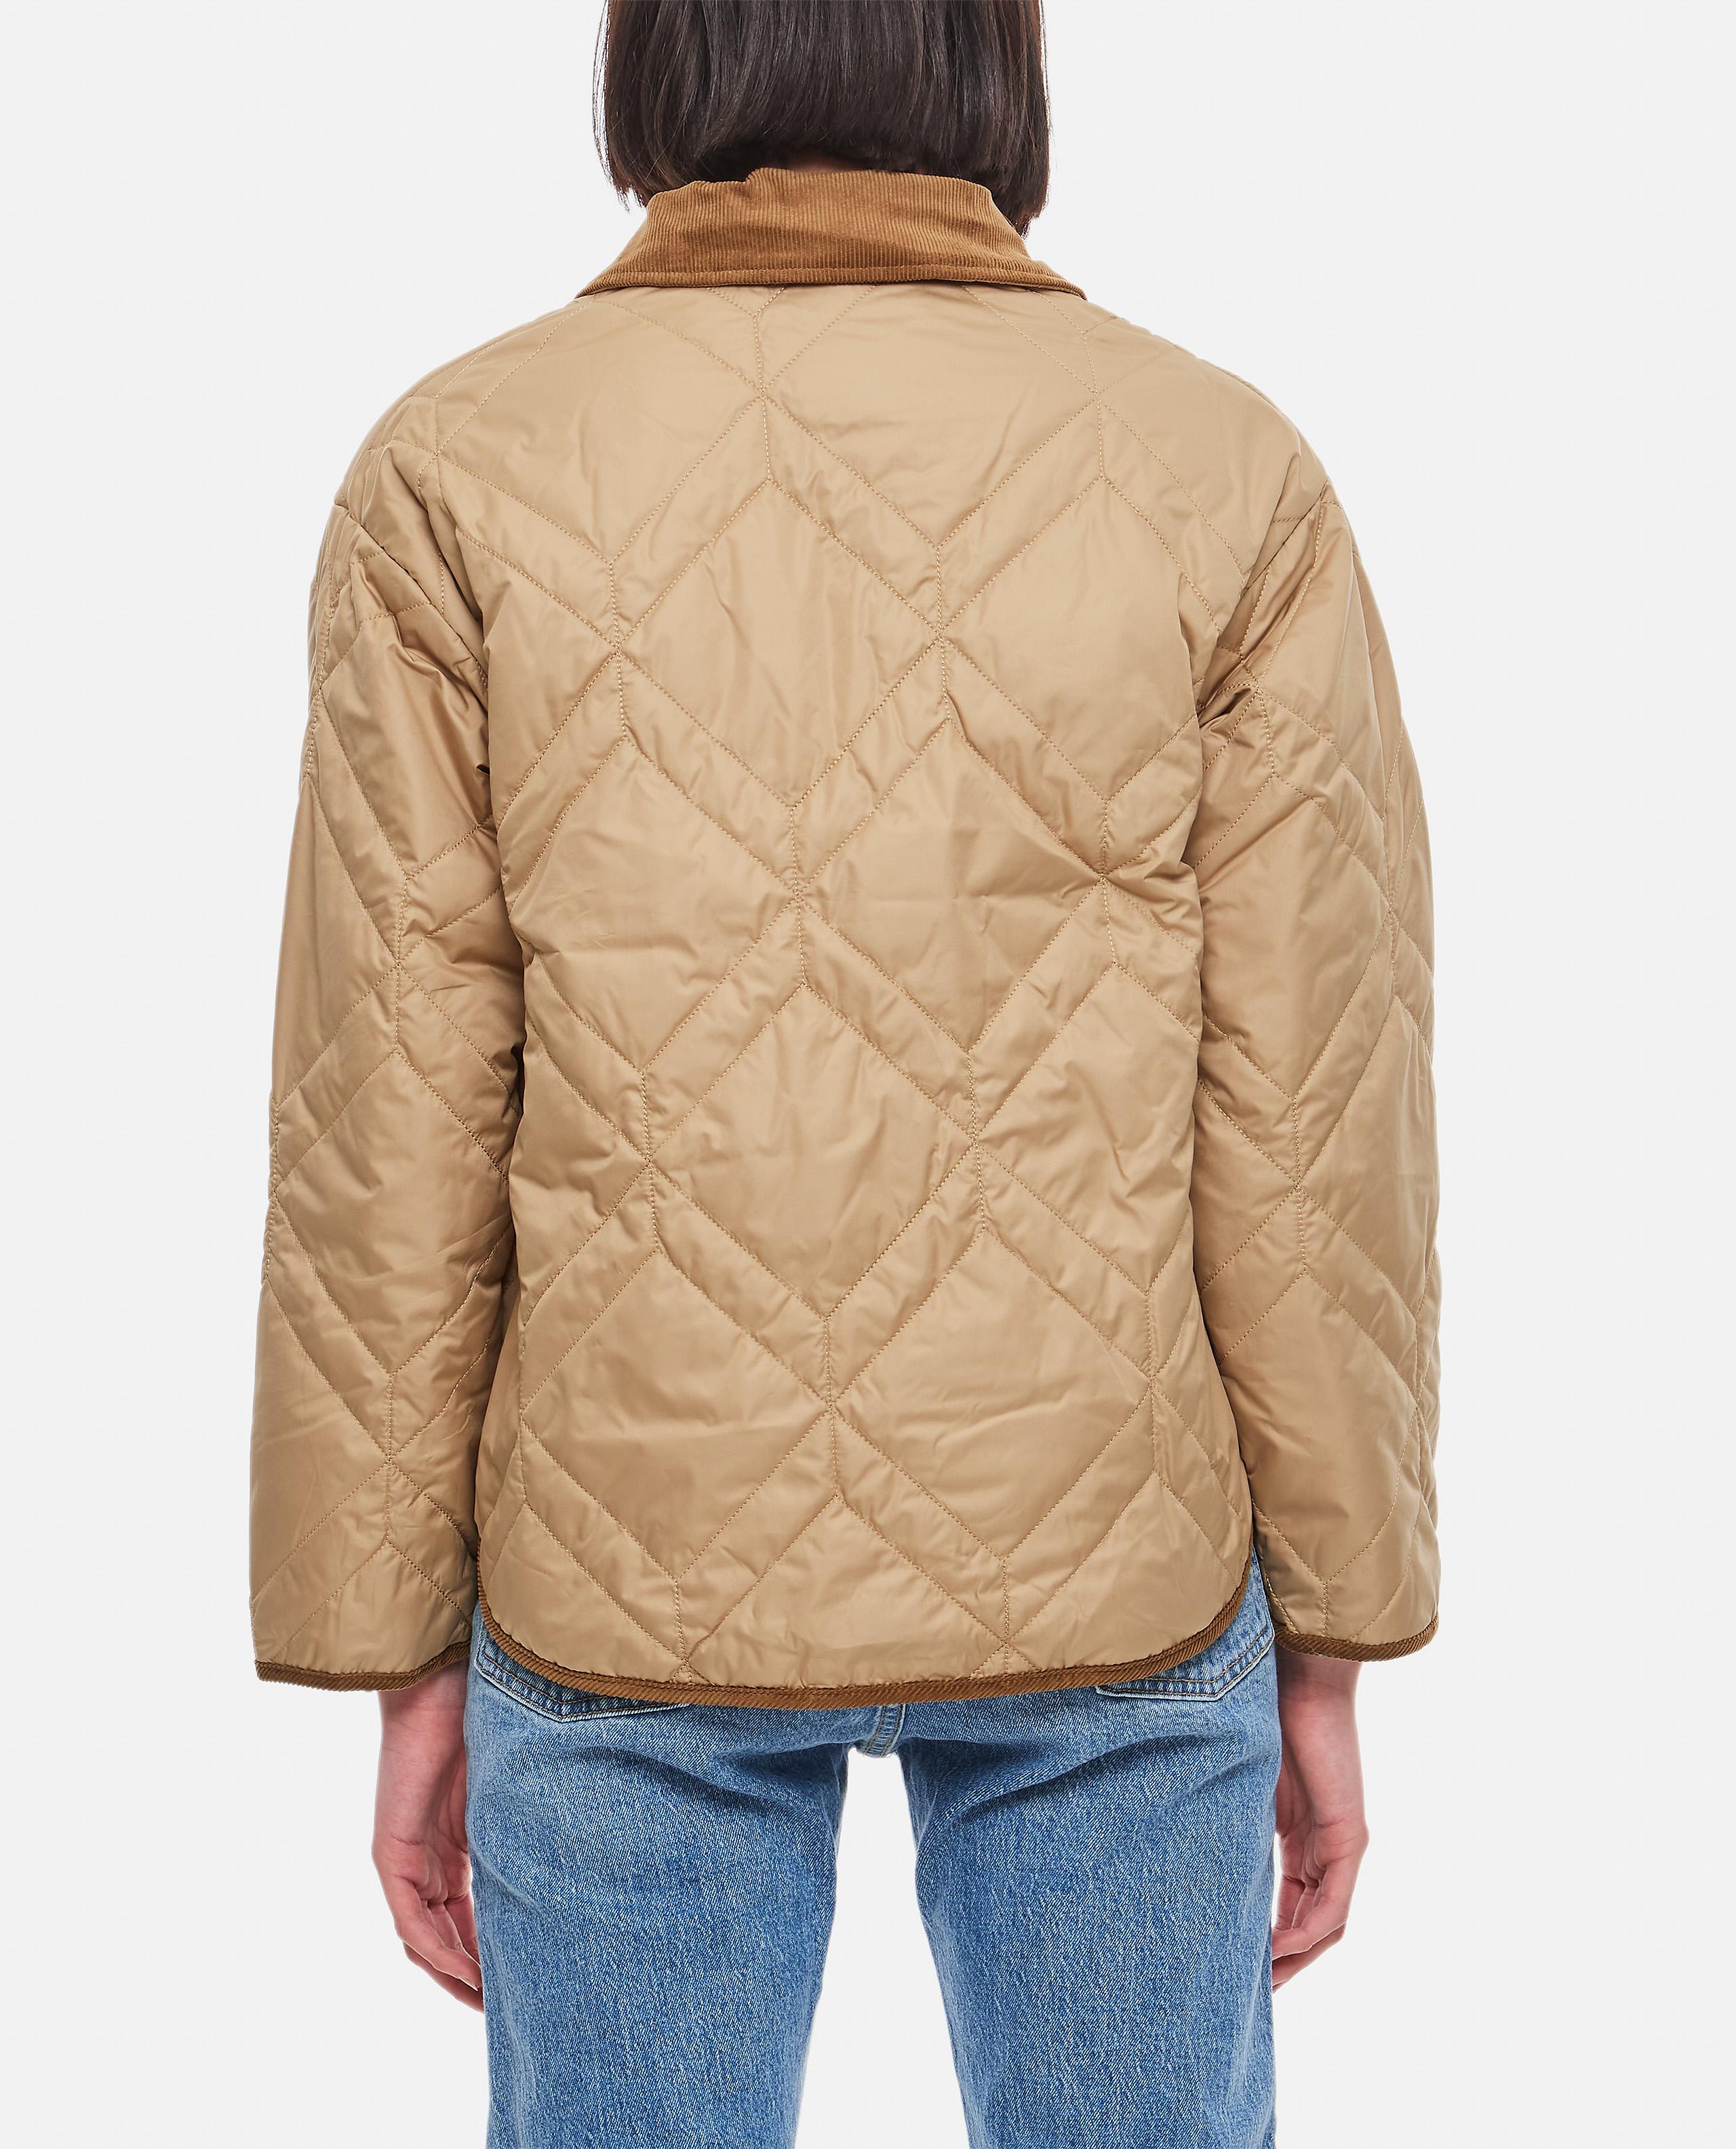 Barbour Barrhead Cotton Quilted Jacket in Natural | Lyst